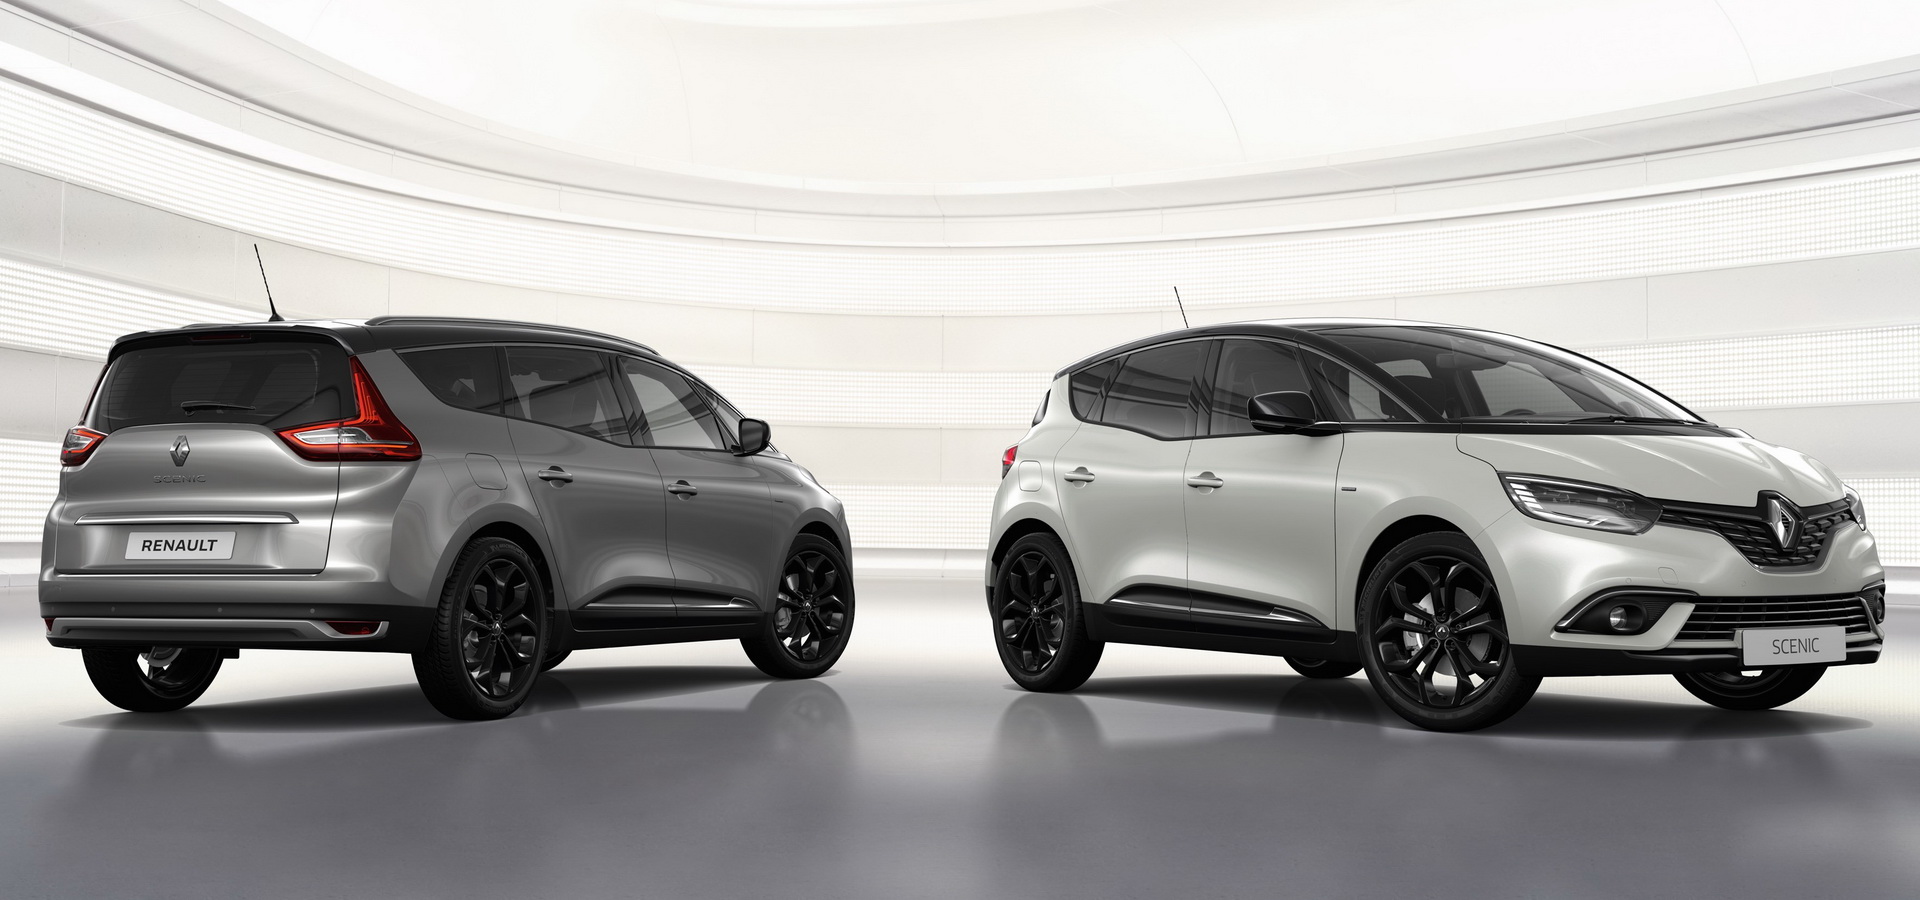 Renault Scenic And Grand Scenic MPVs Their Black Too | Carscoops